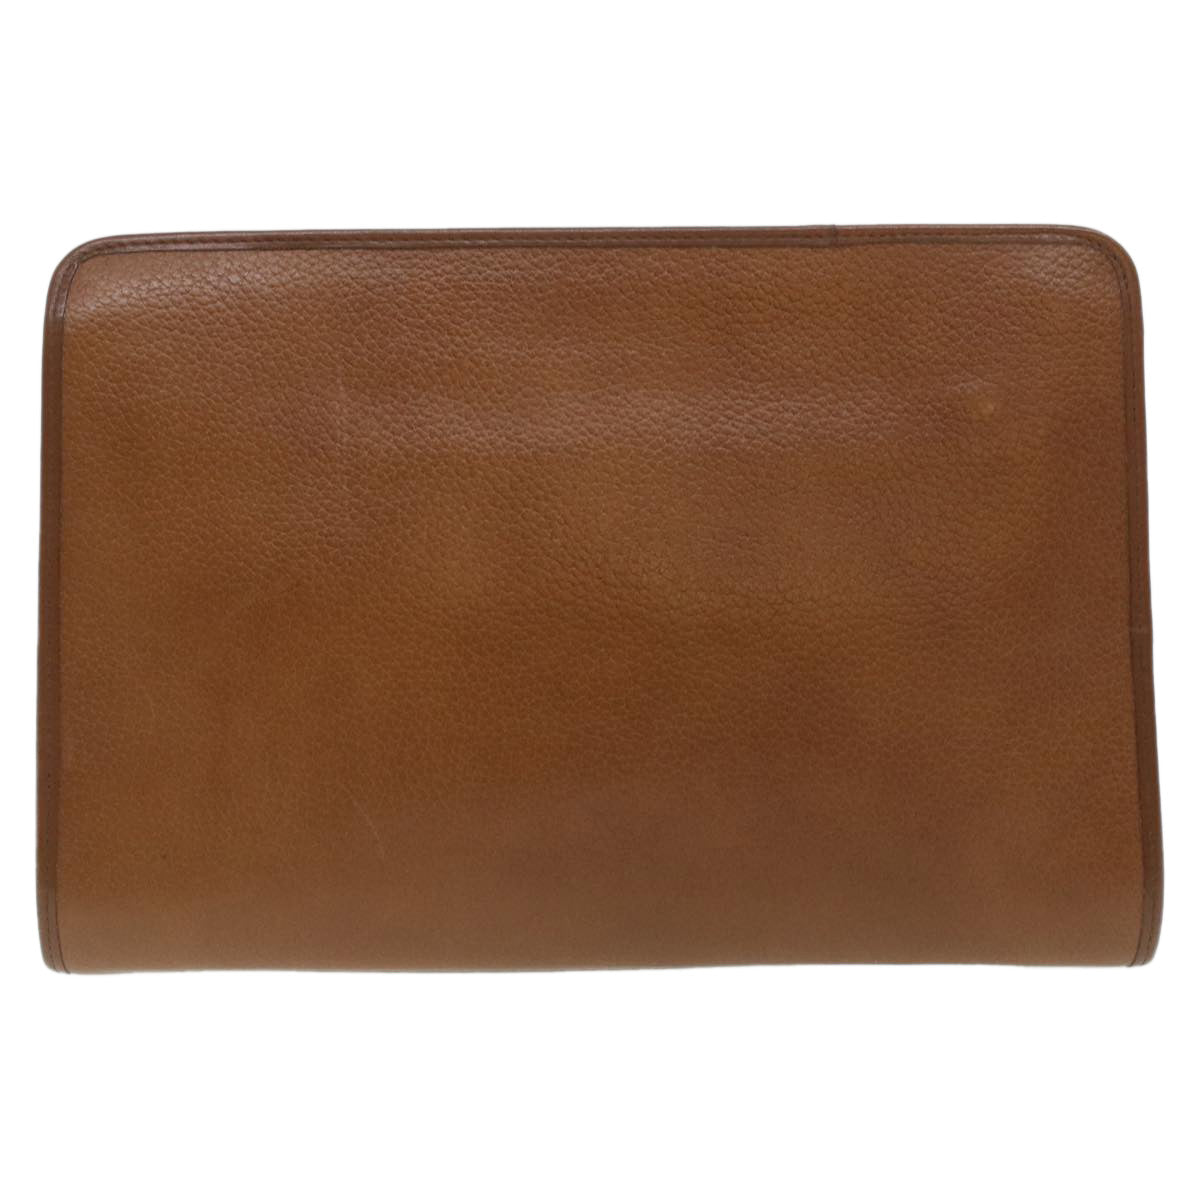 Burberrys Clutch Bag Leather Brown Auth bs4313 - 0